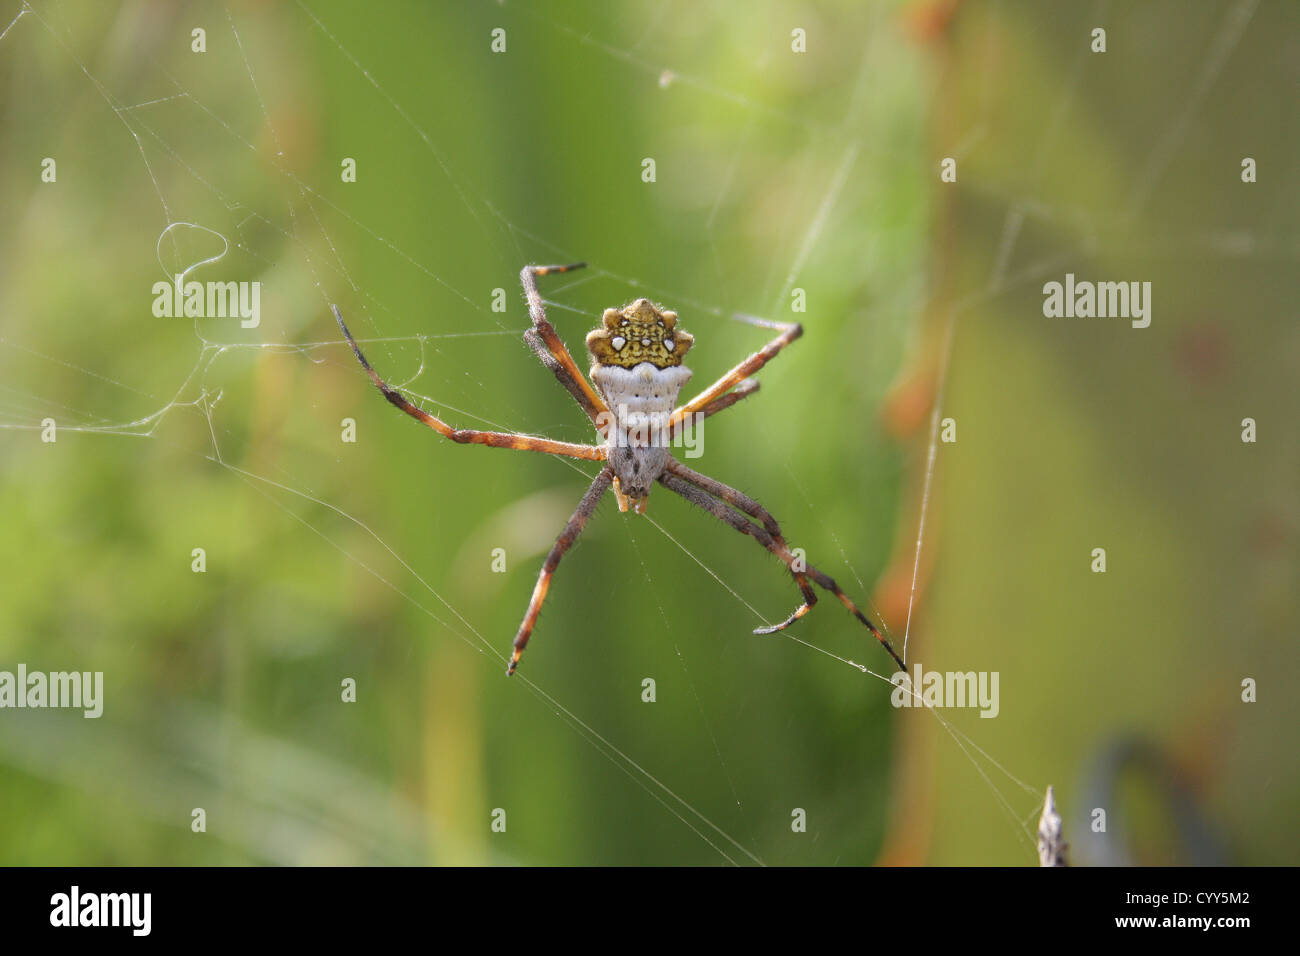 A yellow and white Orb Weaver Spider waiting for prey in its web in Cotacachi, Ecuador Stock Photo